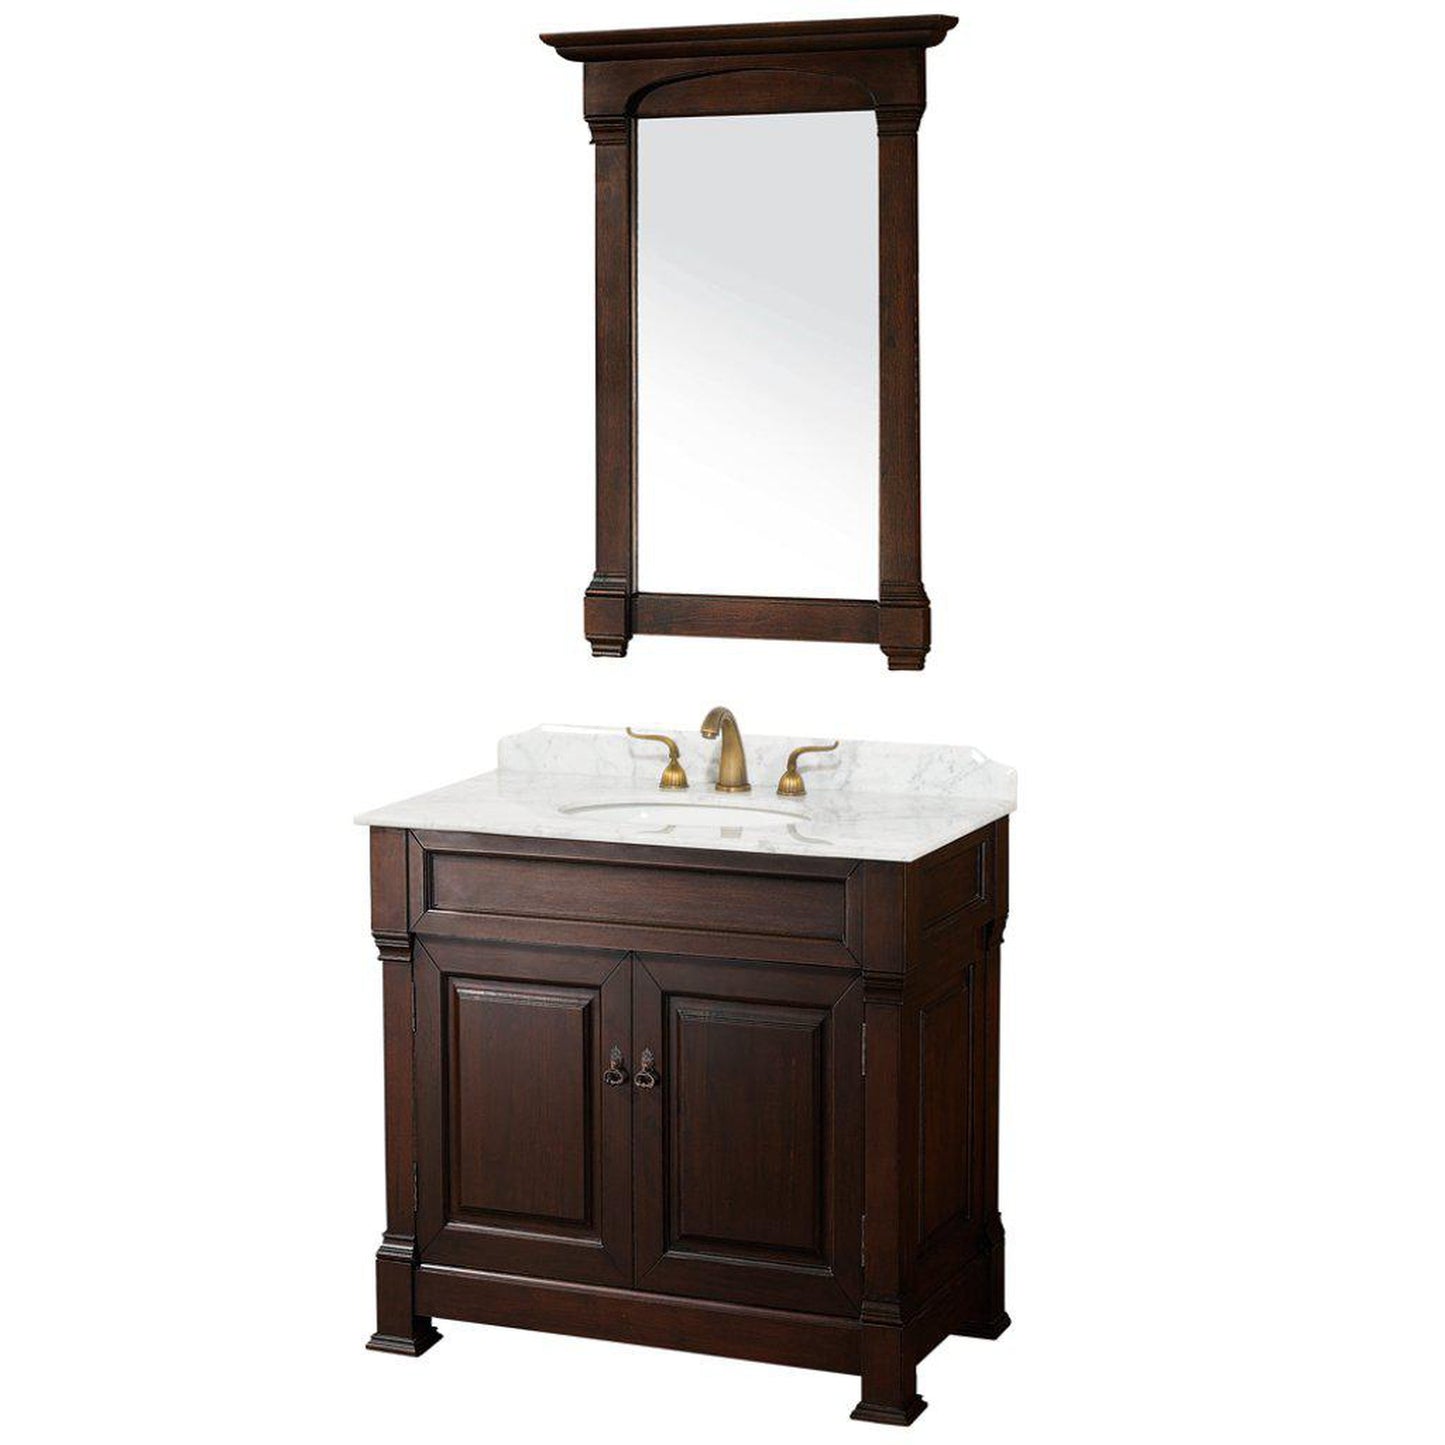 Wyndham Collection Andover 36" Single Bathroom Dark Cherry Vanity Set With White Carrara Marble Countertop And Undermount Oval Sink, And 28" Mirror